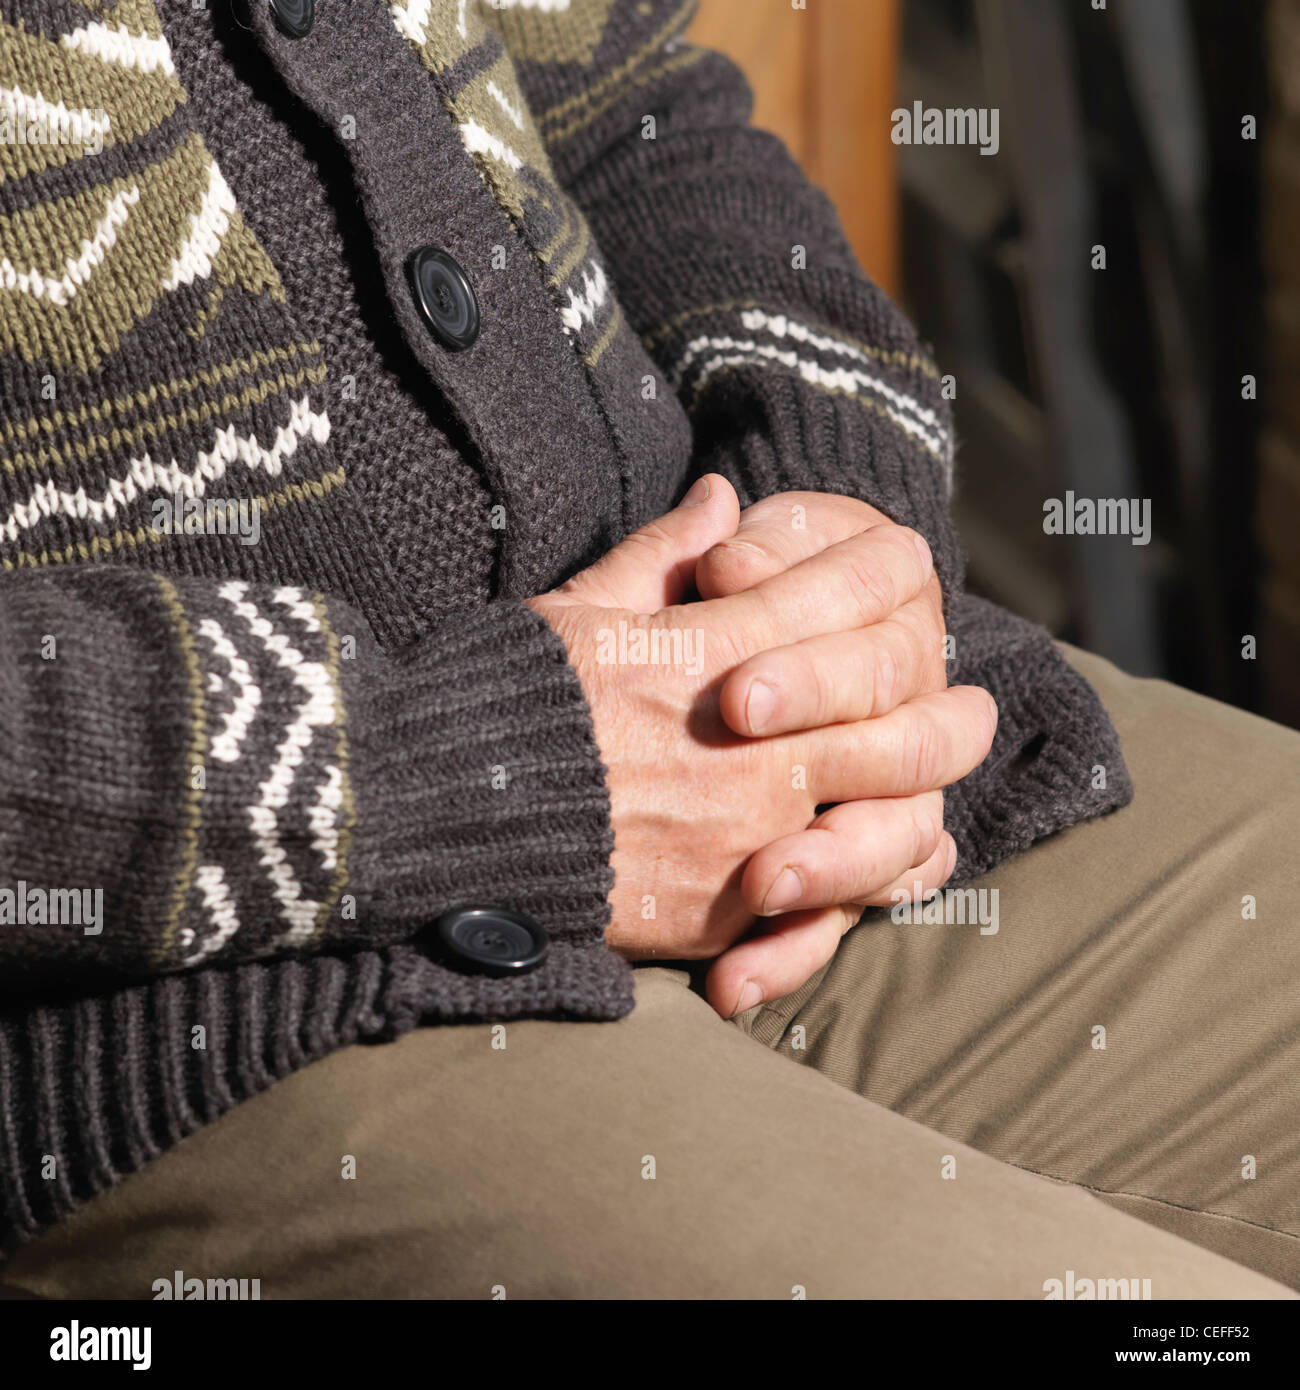 Older man sitting with hands folded Stock Photo